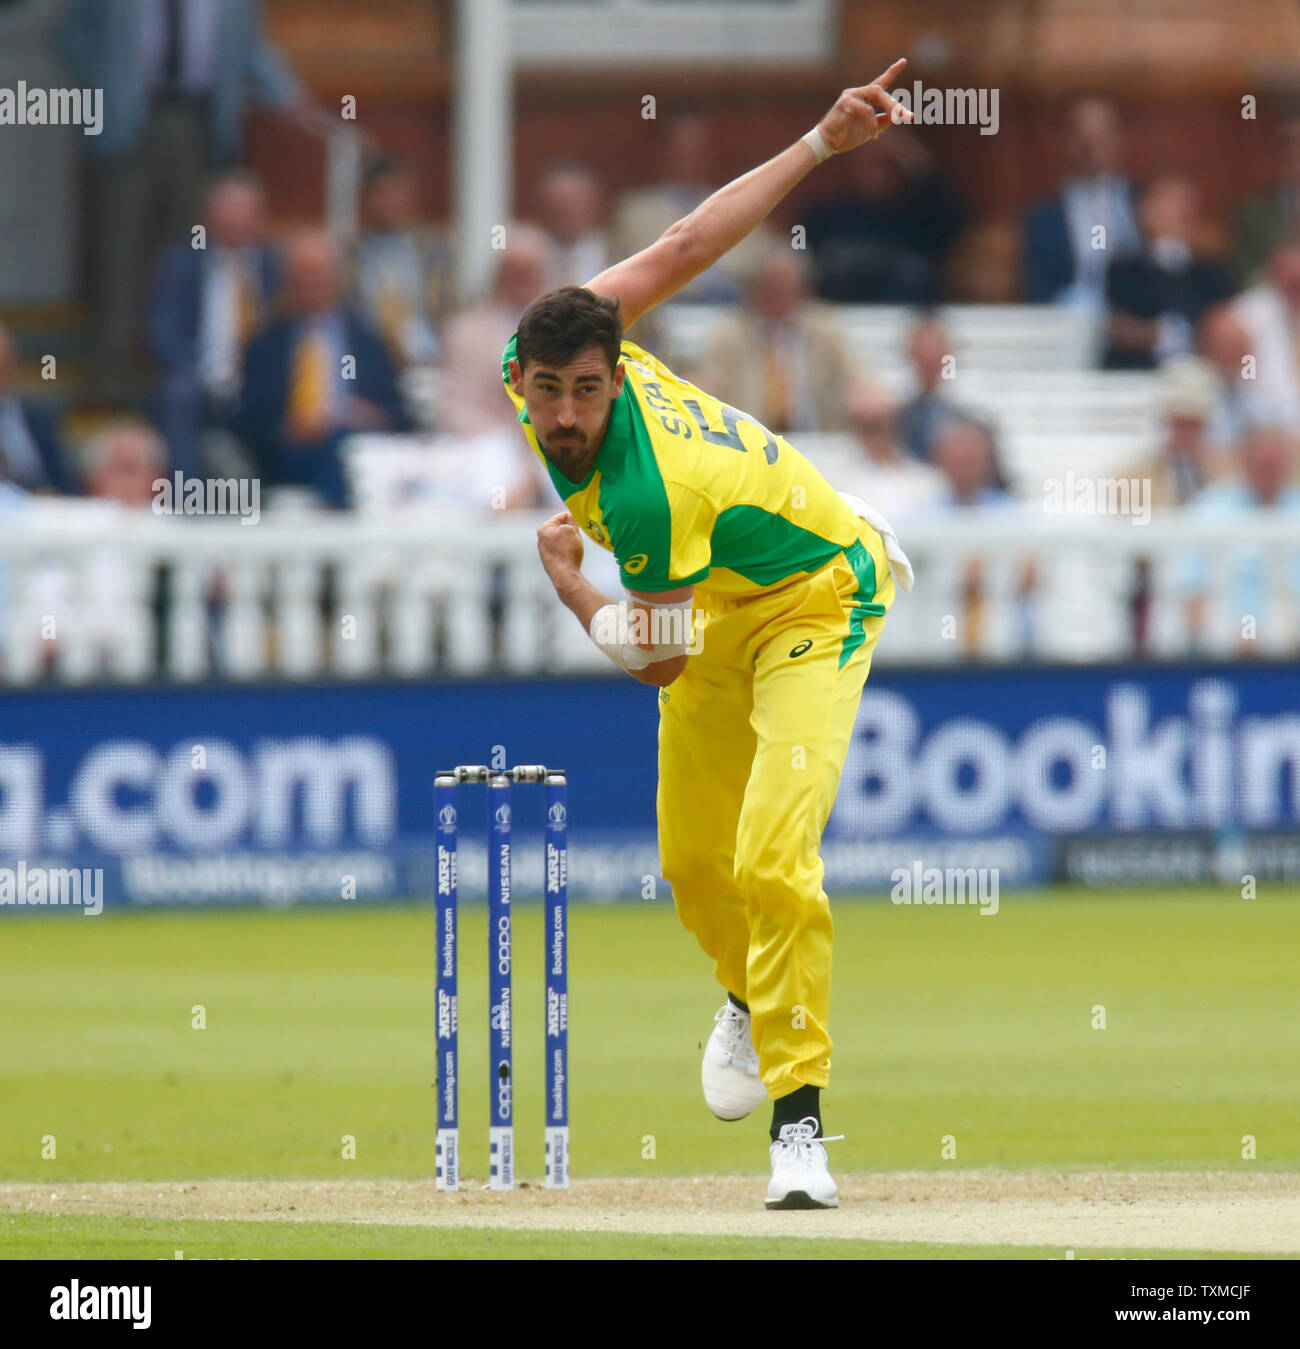 London, UK. 25th June, 2019. LONDON, England. June 25: Mitchell Starc of Australia during ICC Cricket World Cup between England and Australia at the Lord's Ground on 25 June 2019 in London, England. Credit: Action Foto Sport/Alamy Live News Stock Photo